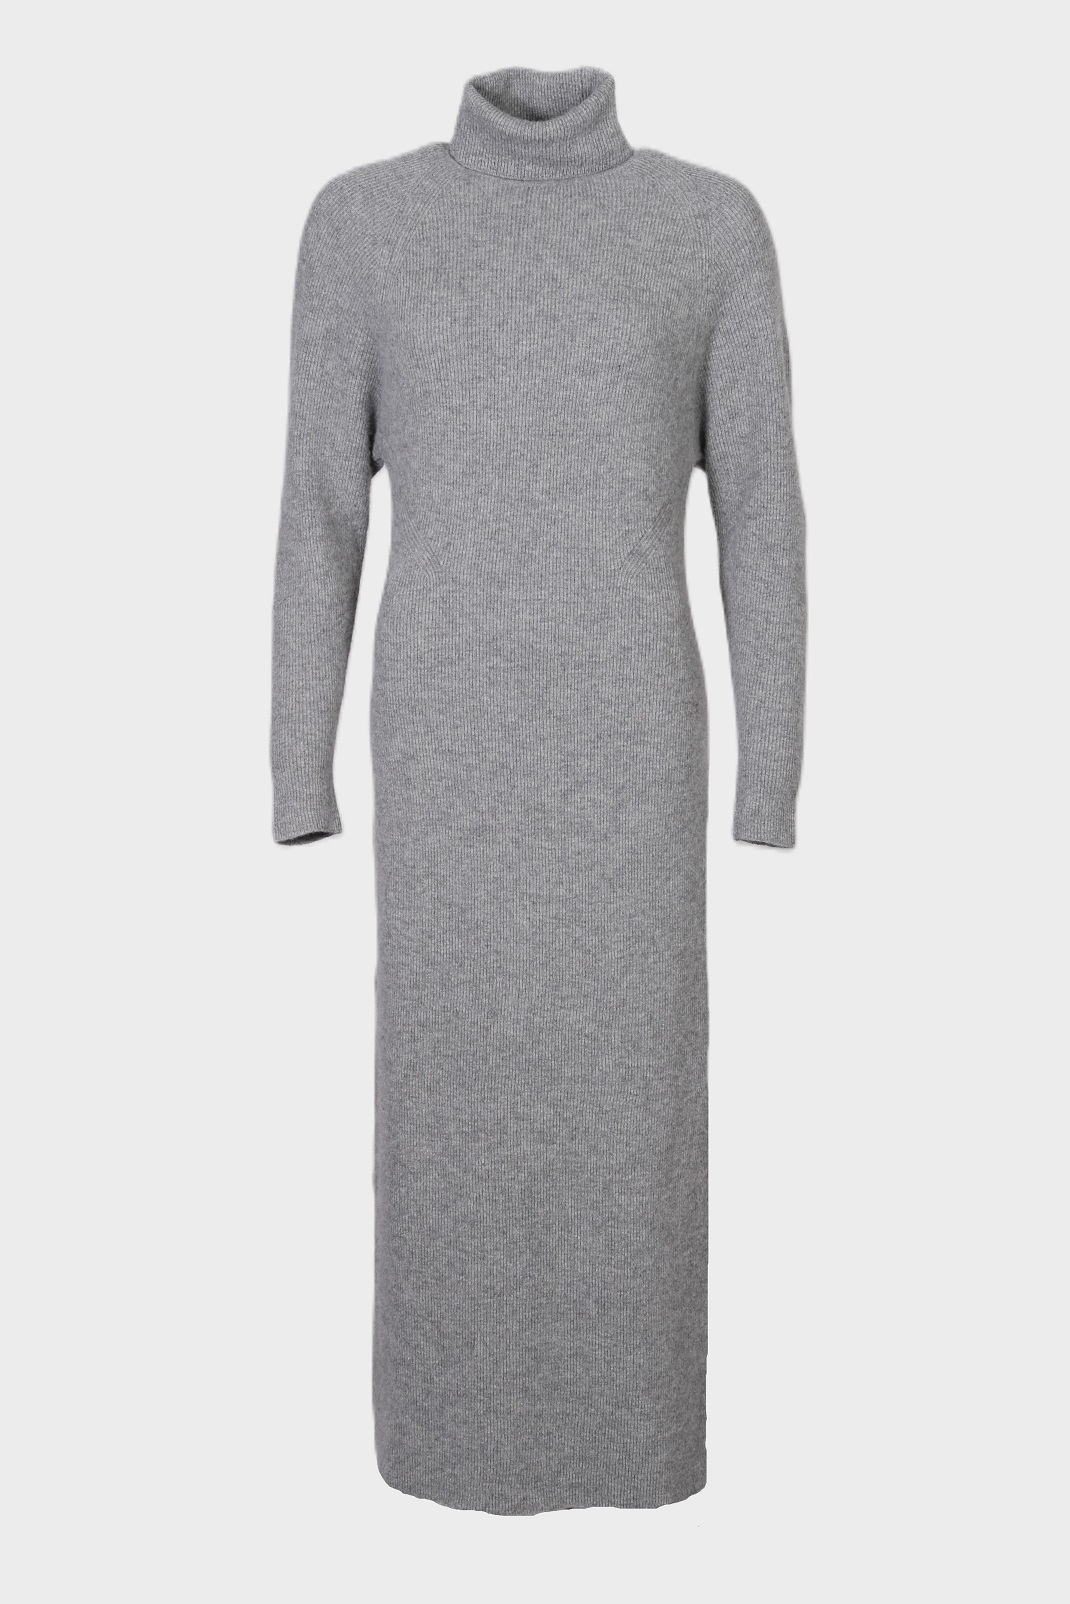 GOLDEN GOOSE Knit Dress Ribbed Wool in Grey S